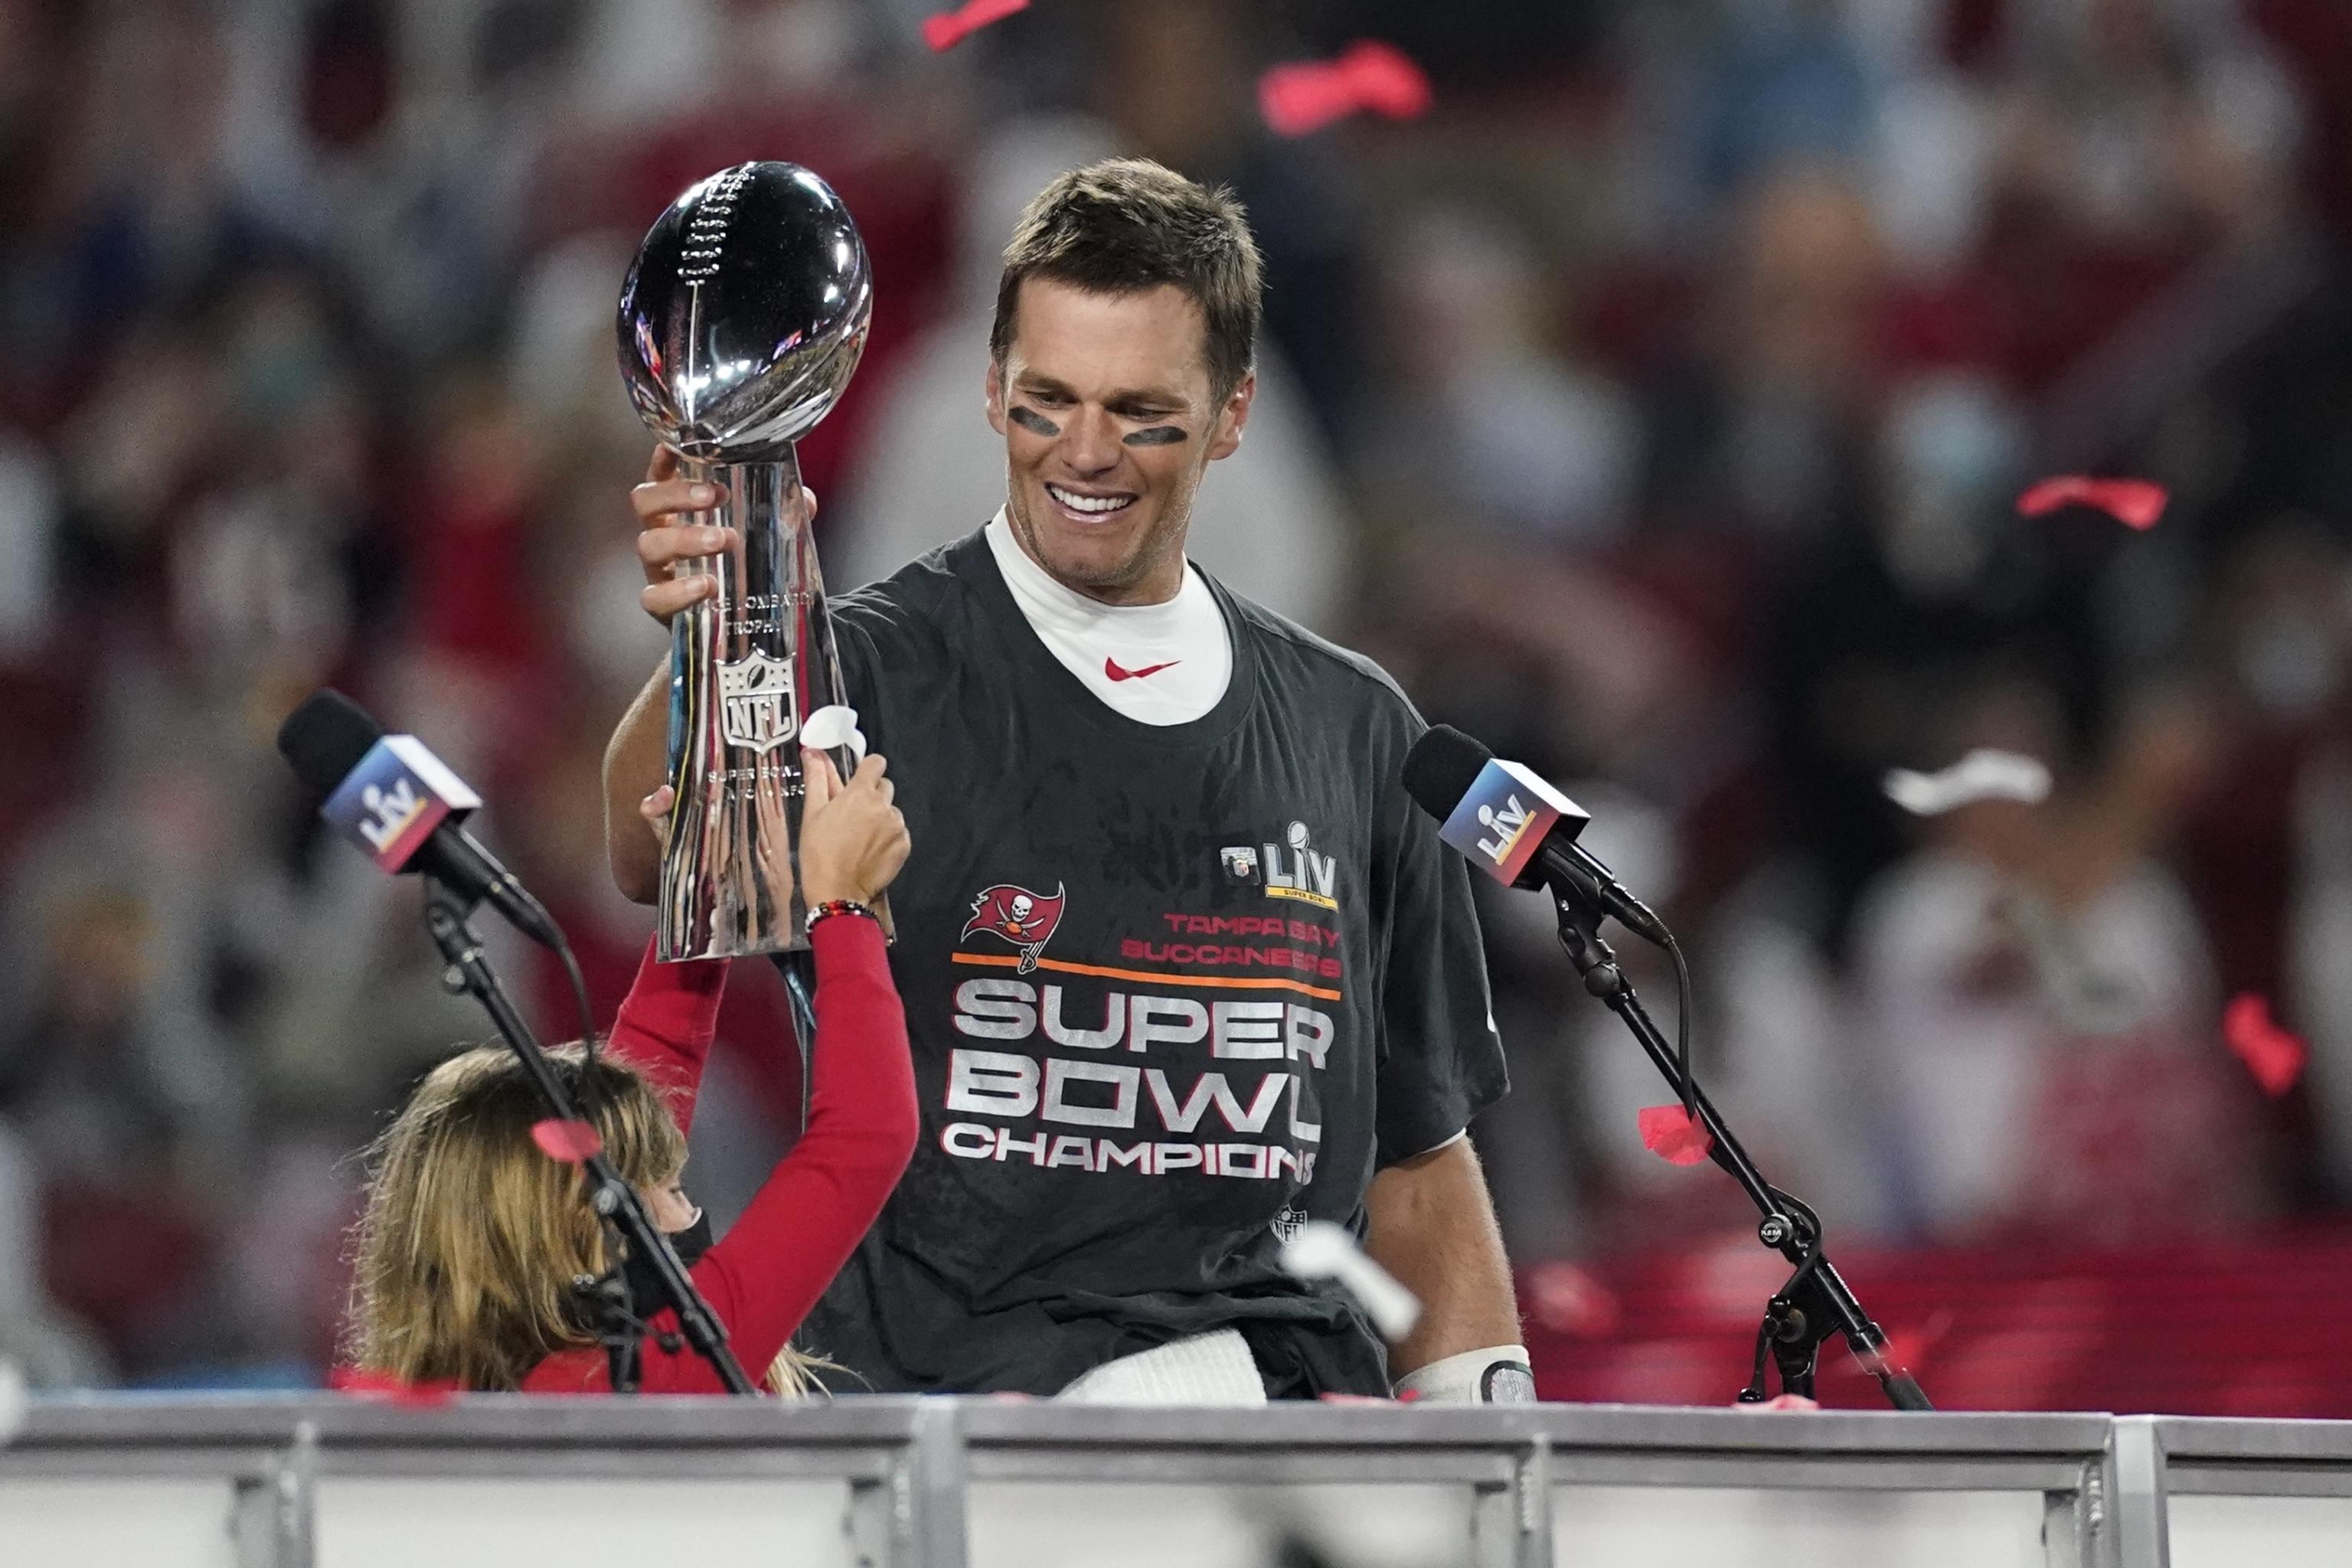 Tom Brady Attends Tampa Super Bowl Parade in $2 Million Boat